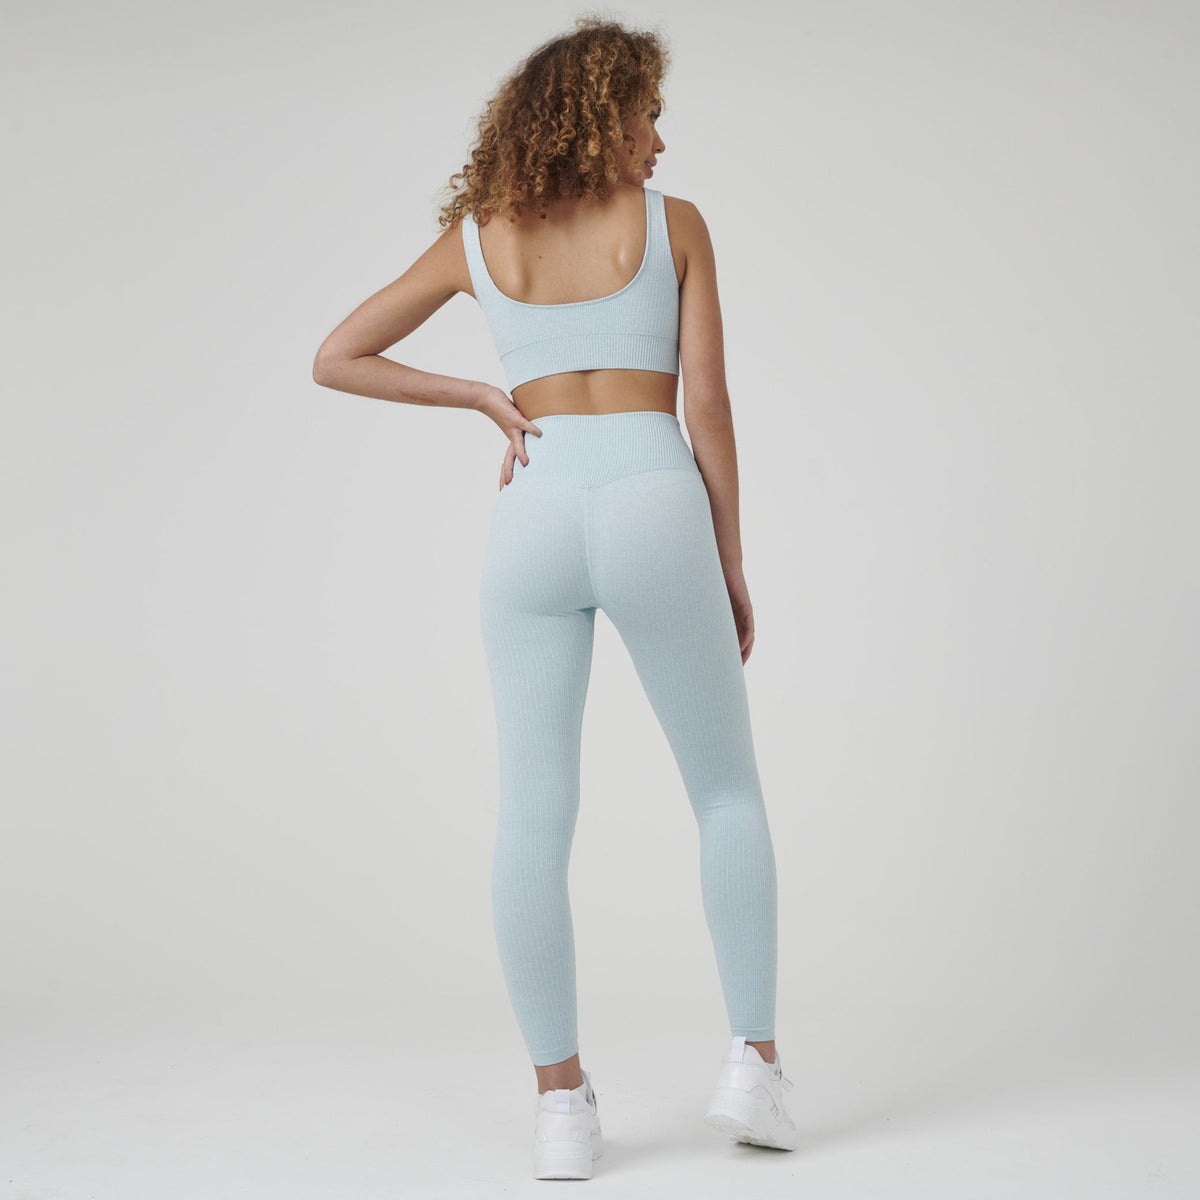 Signature Ribbed Seamless Set (Leggings + Top) by Stylish AF Fitness Co